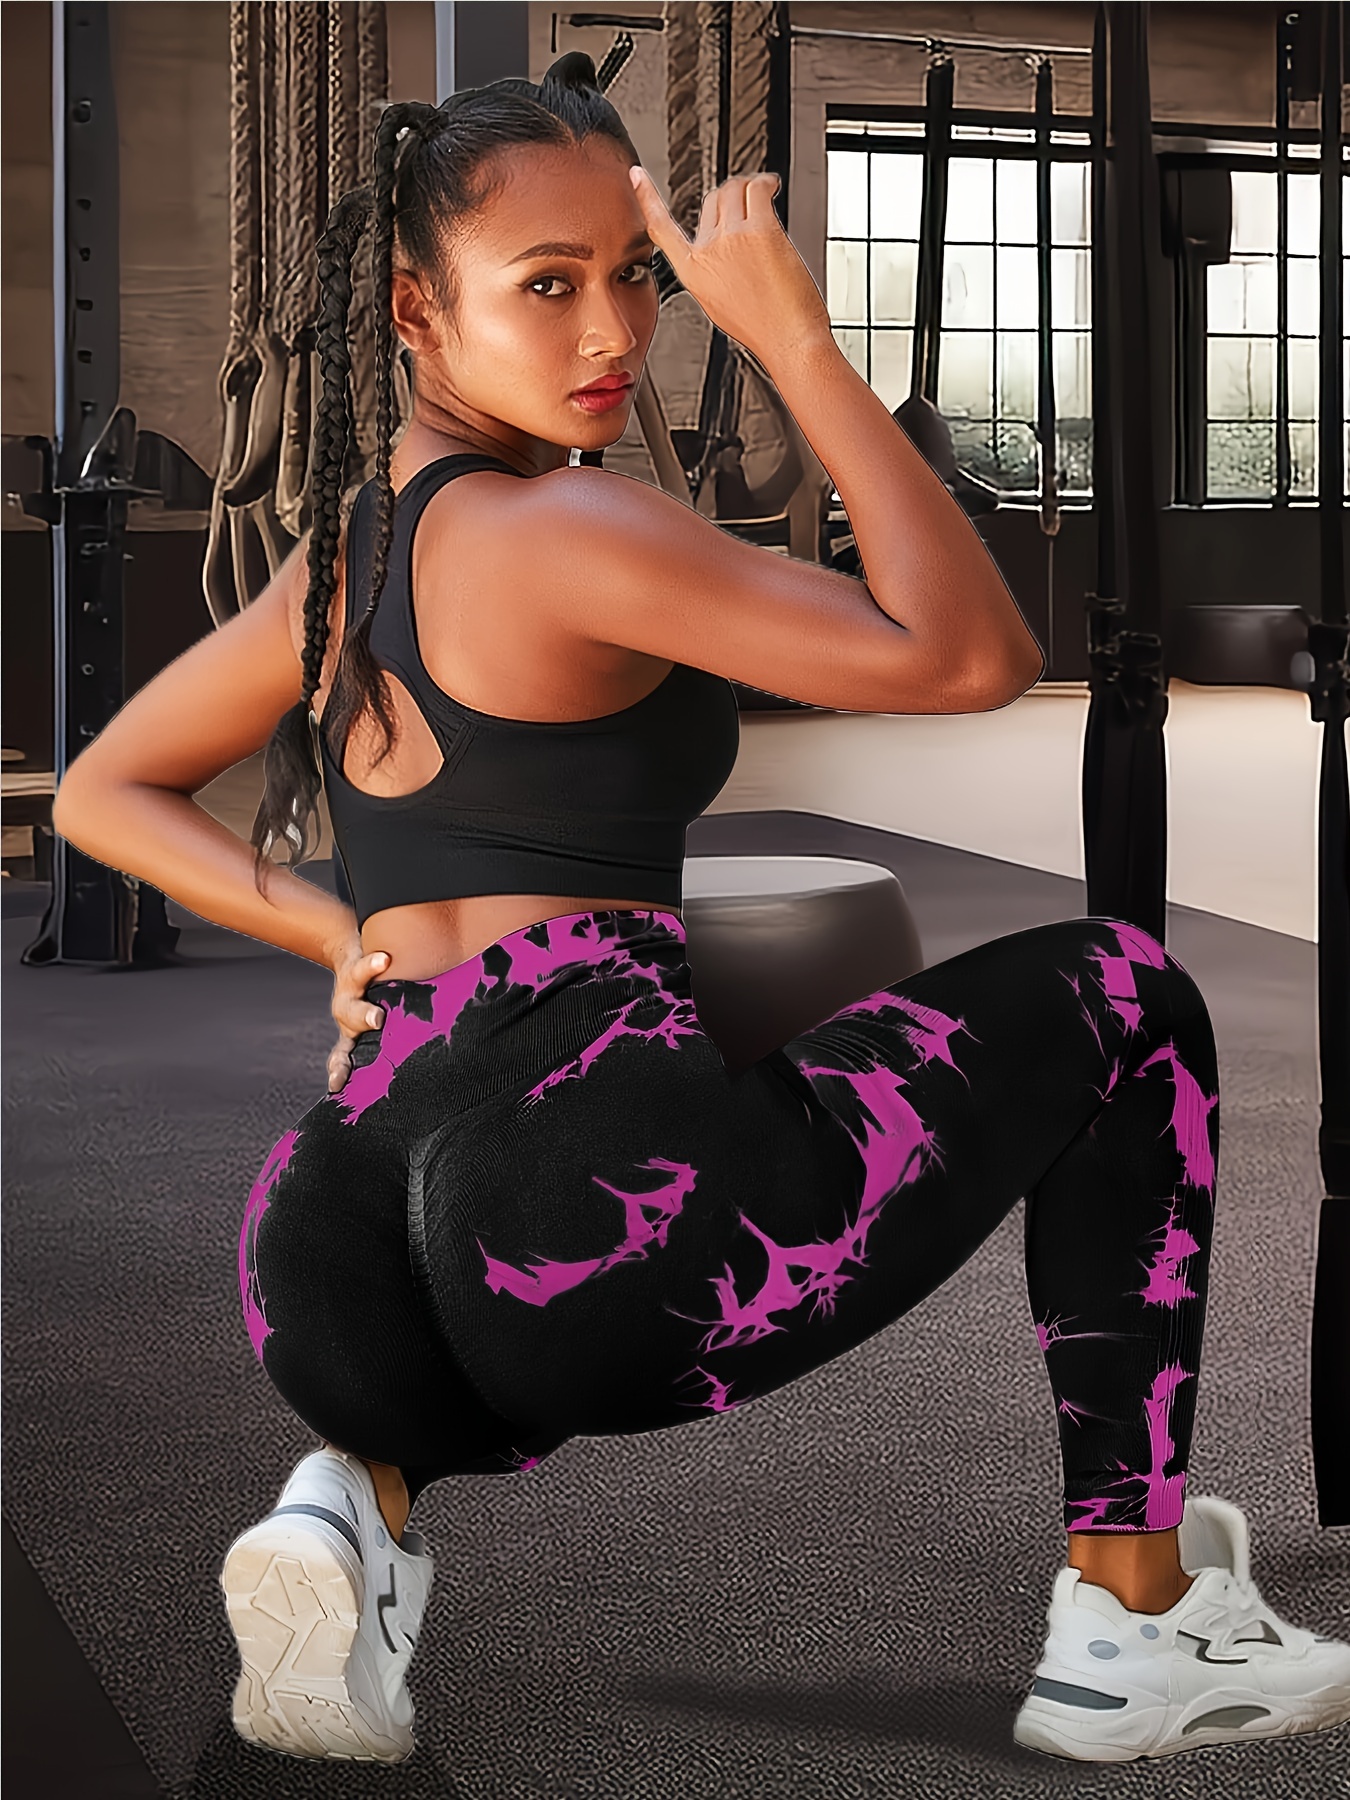 Women Butt Leggings Gym Tie Dye Push Daily Tights for Up Hip Lift